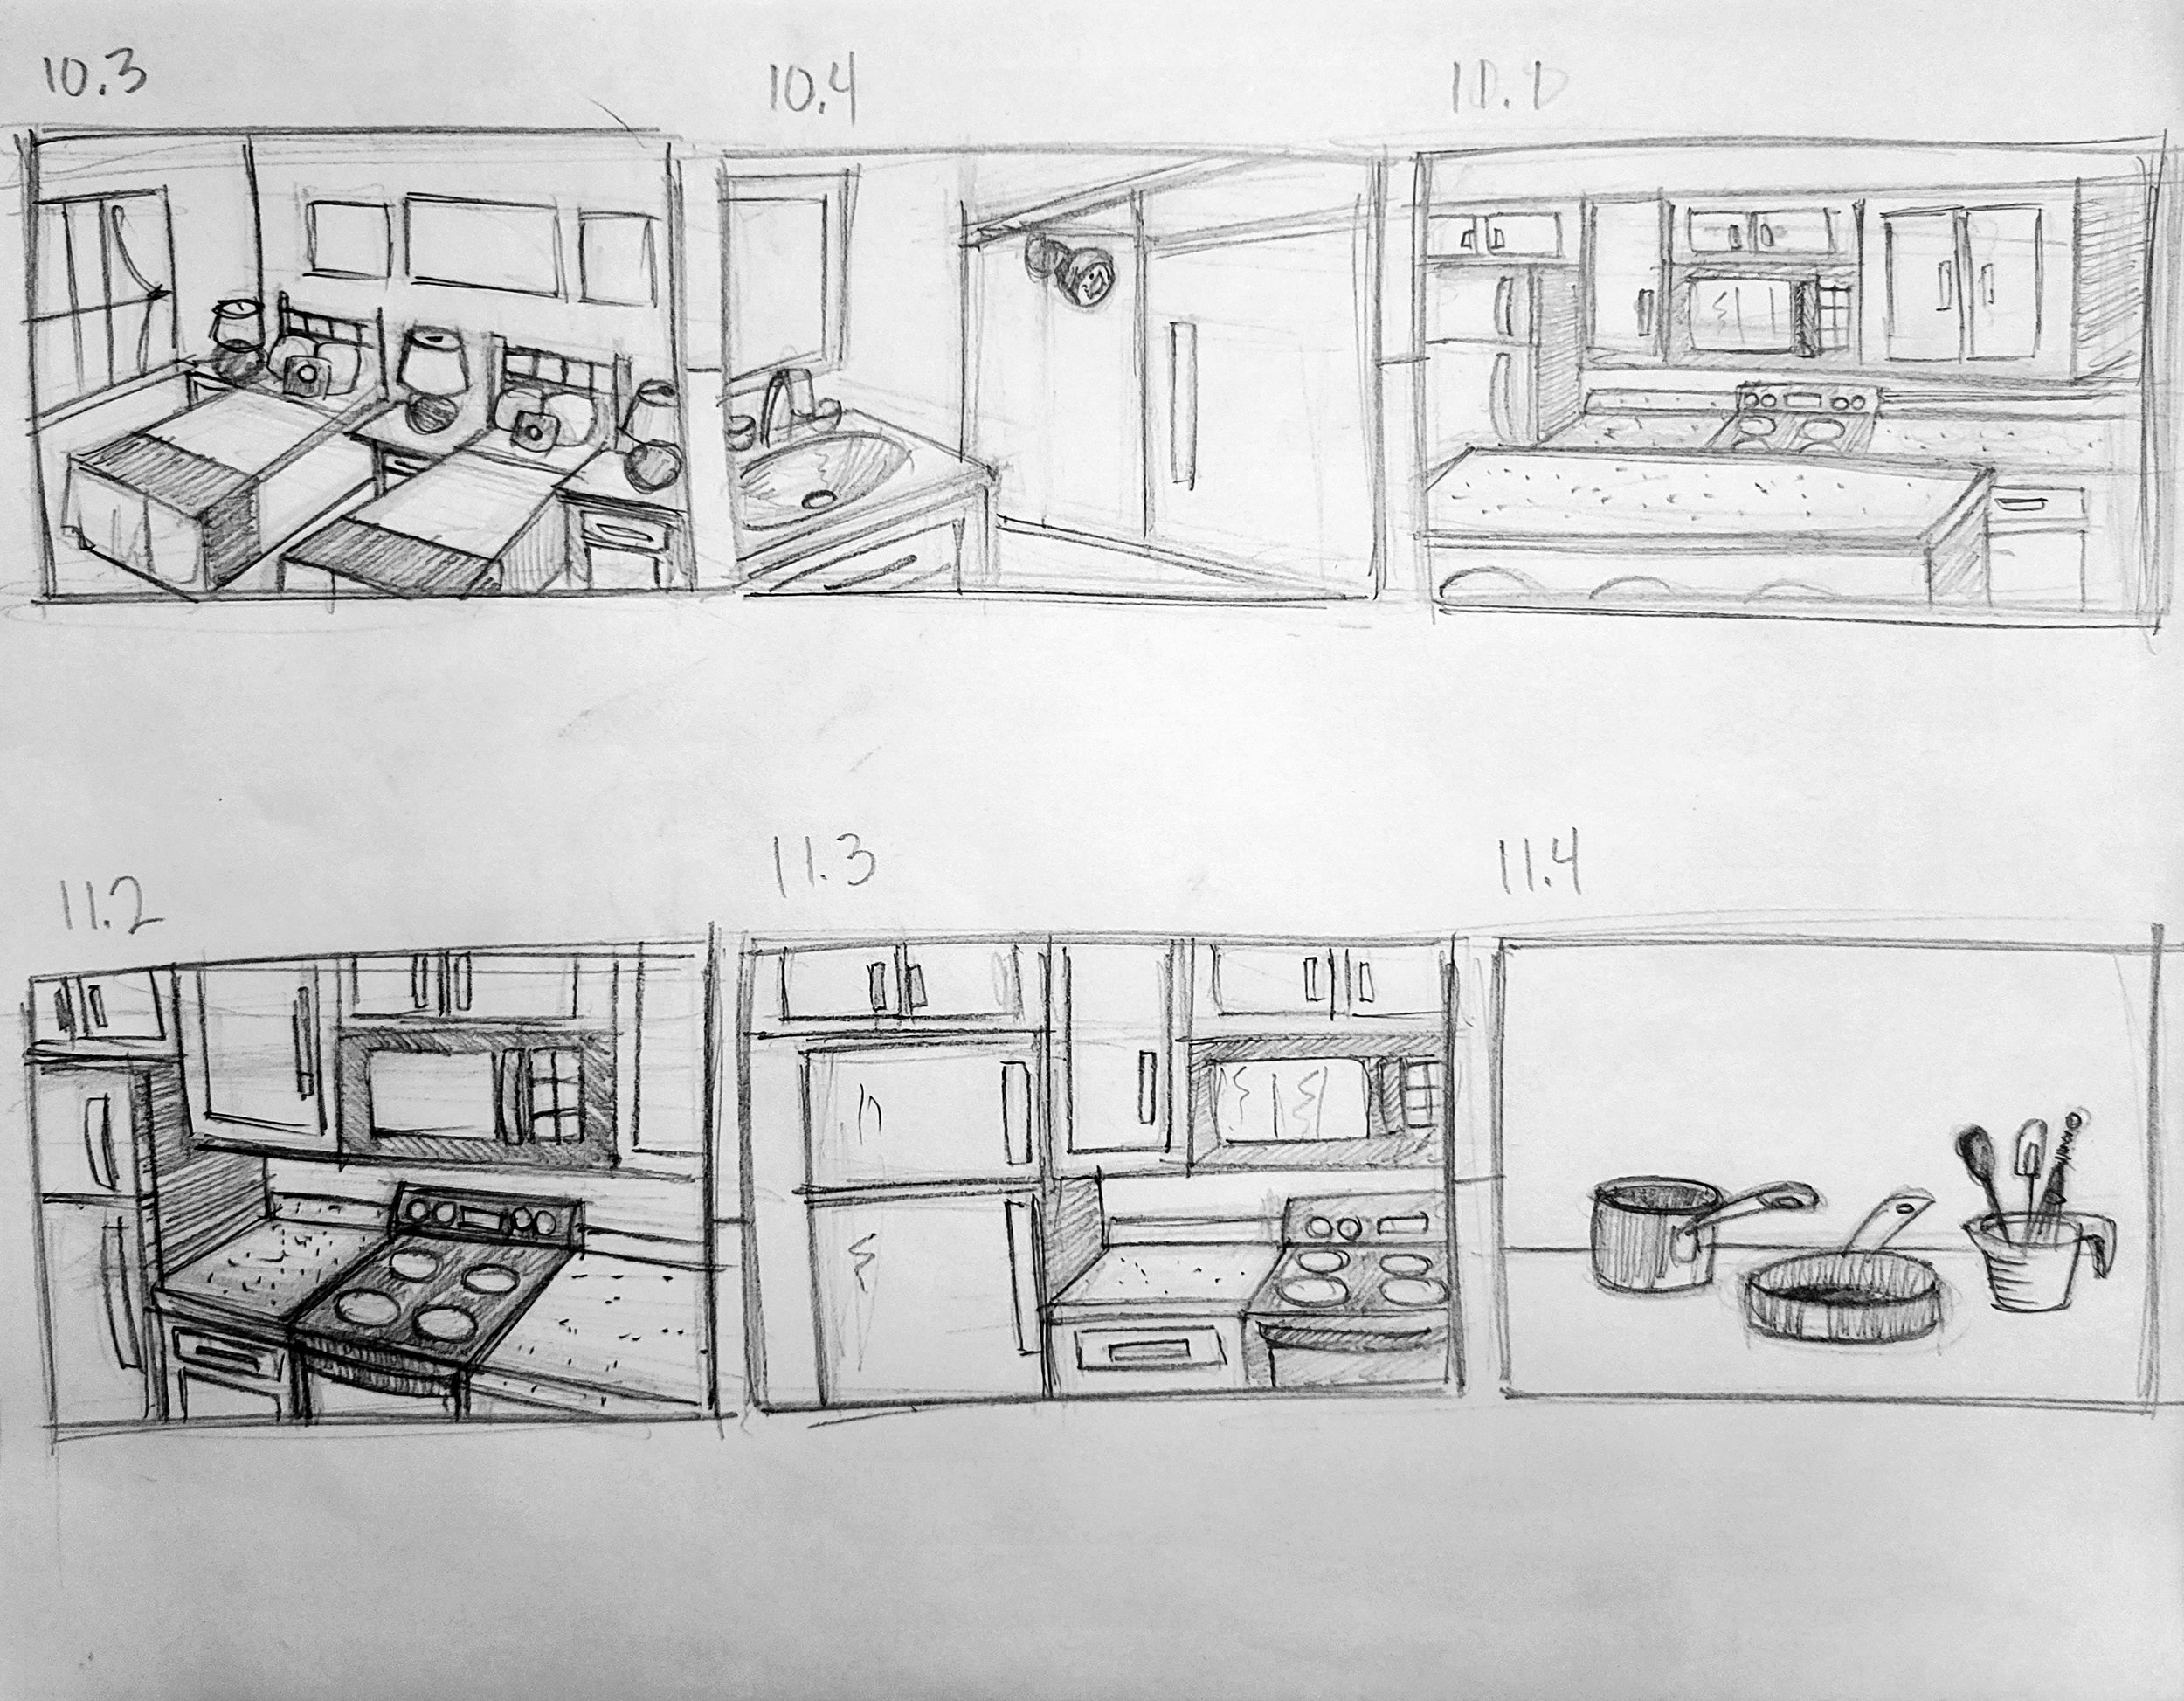 WR_Real_Suite_Eats_S1_E2_StoryBoard_Frames_10_3_to_11_4.jpg